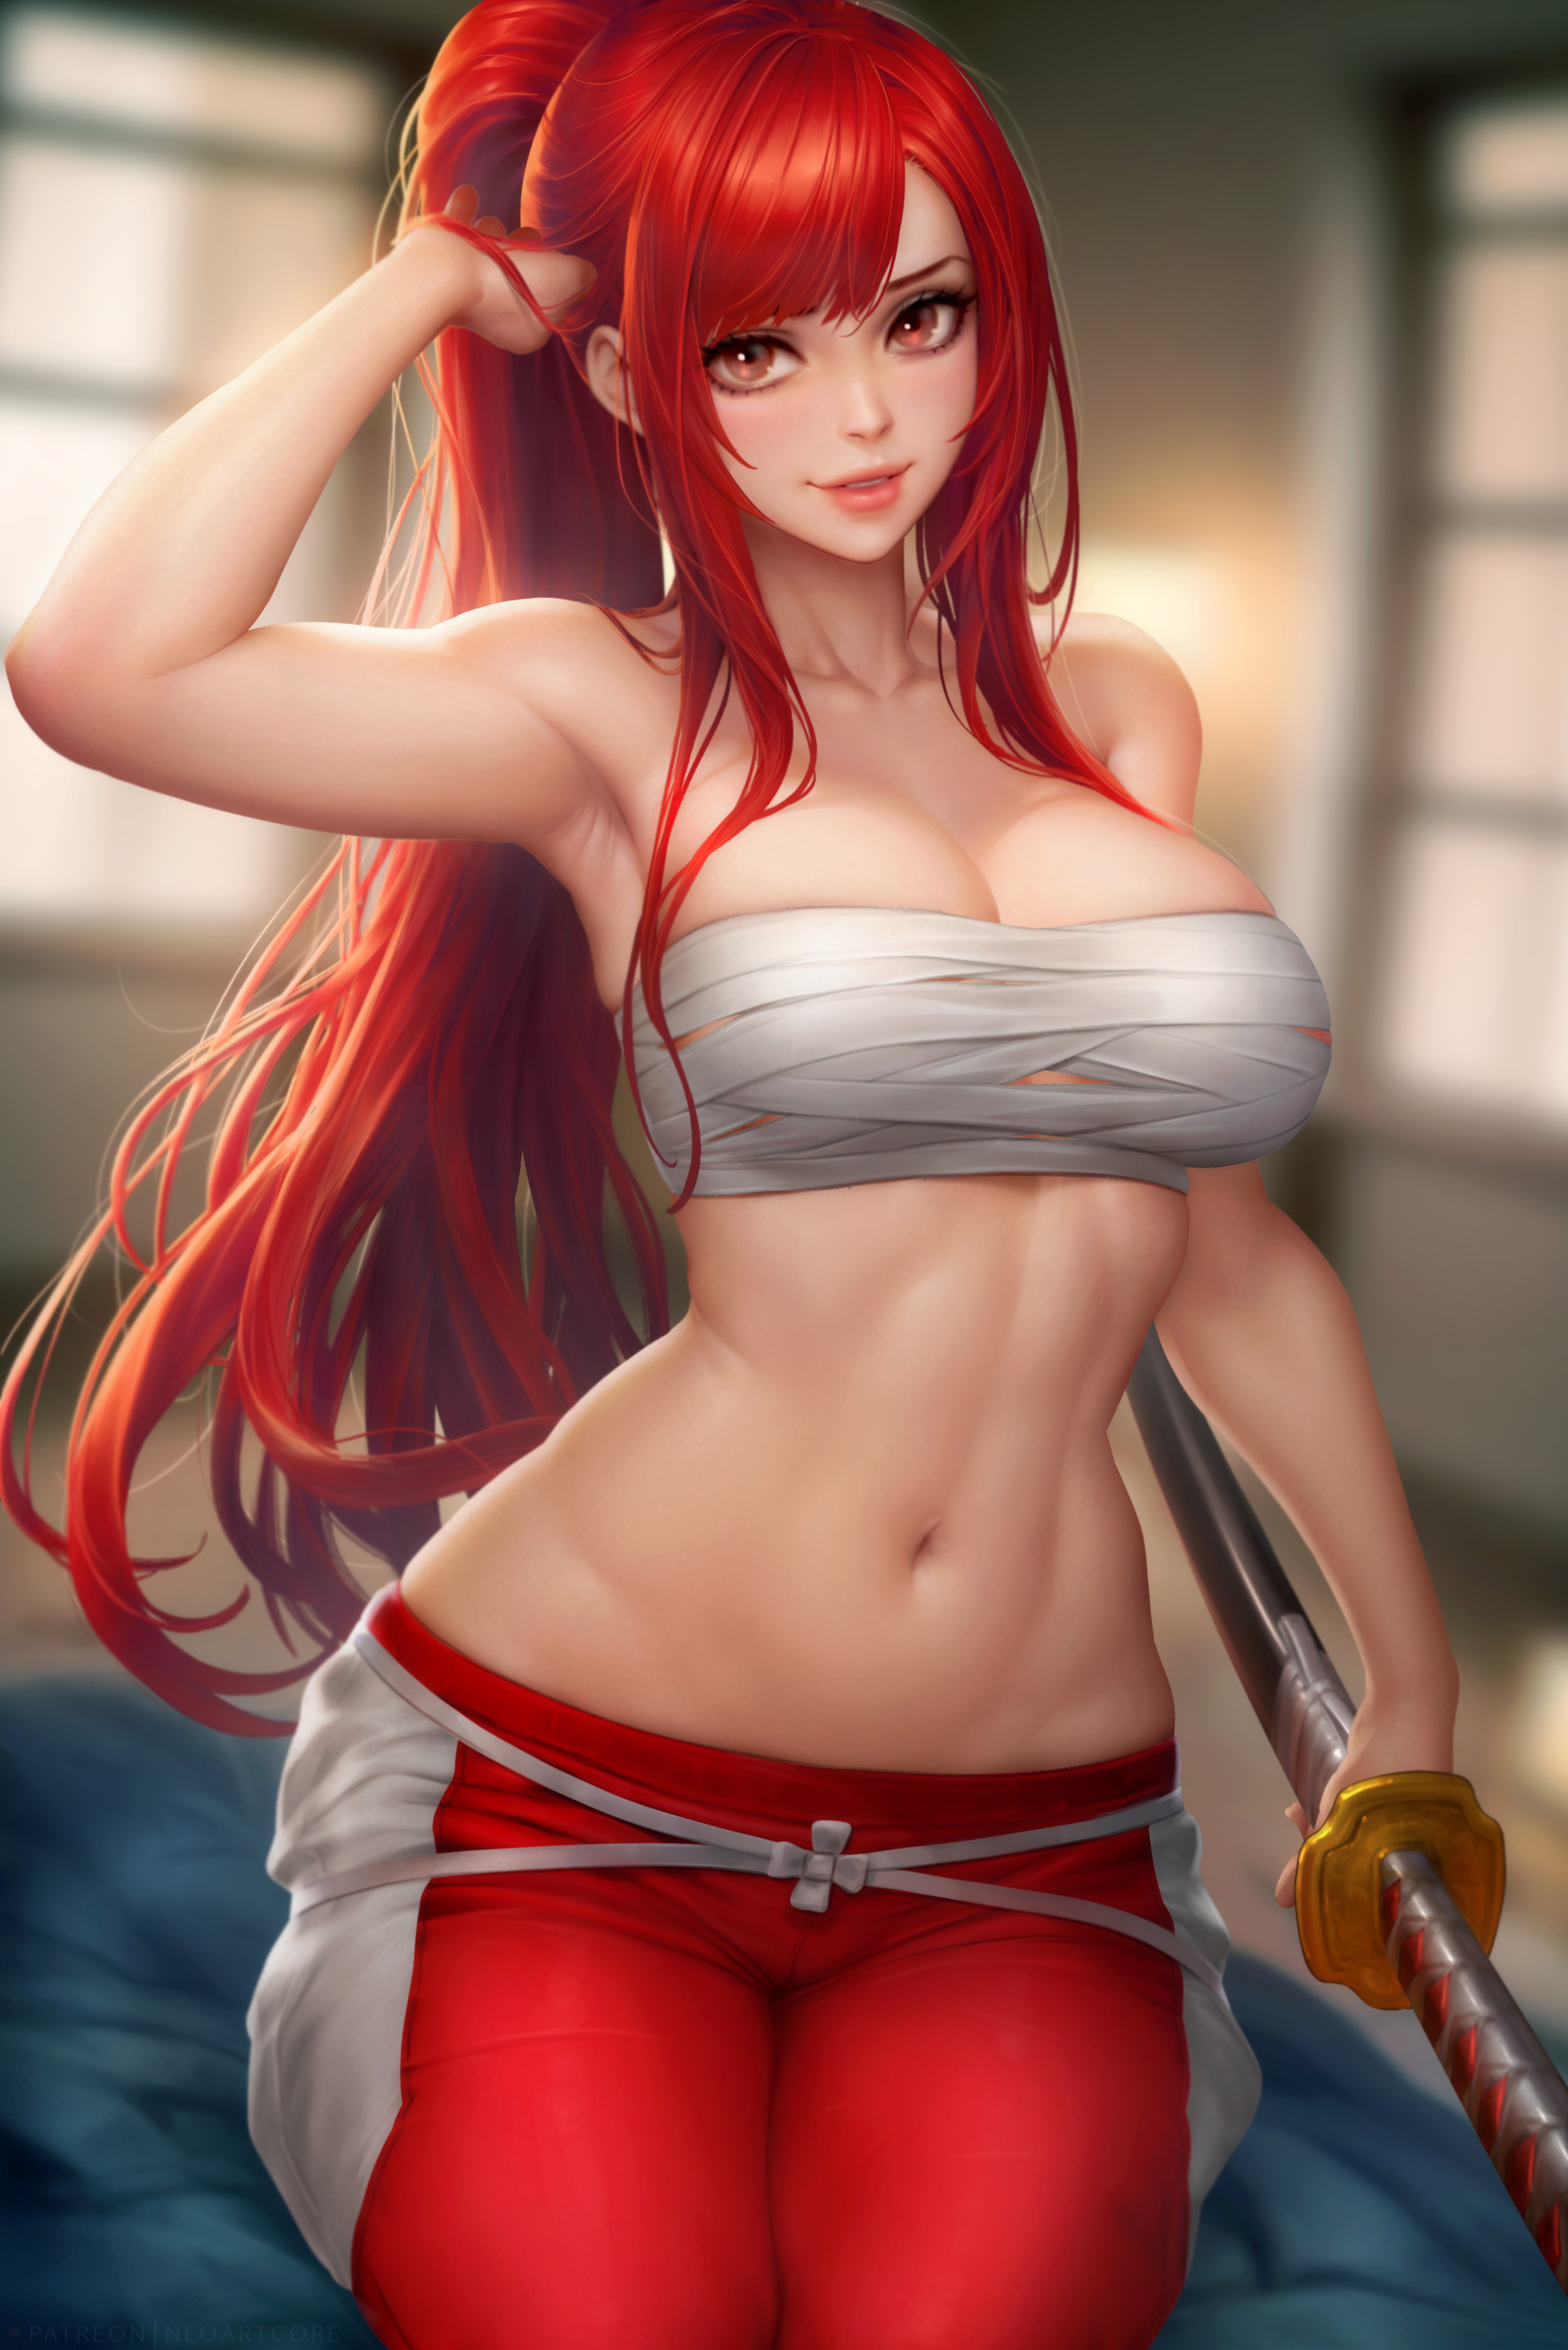 Anime 2400x3597 Scarlet Erza Fairy Tail anime anime girls 2D artwork drawing fan art NeoArtCorE (artist) sarashi belly portrait display long hair belly button sword bandages redhead ponytail looking at viewer smiling